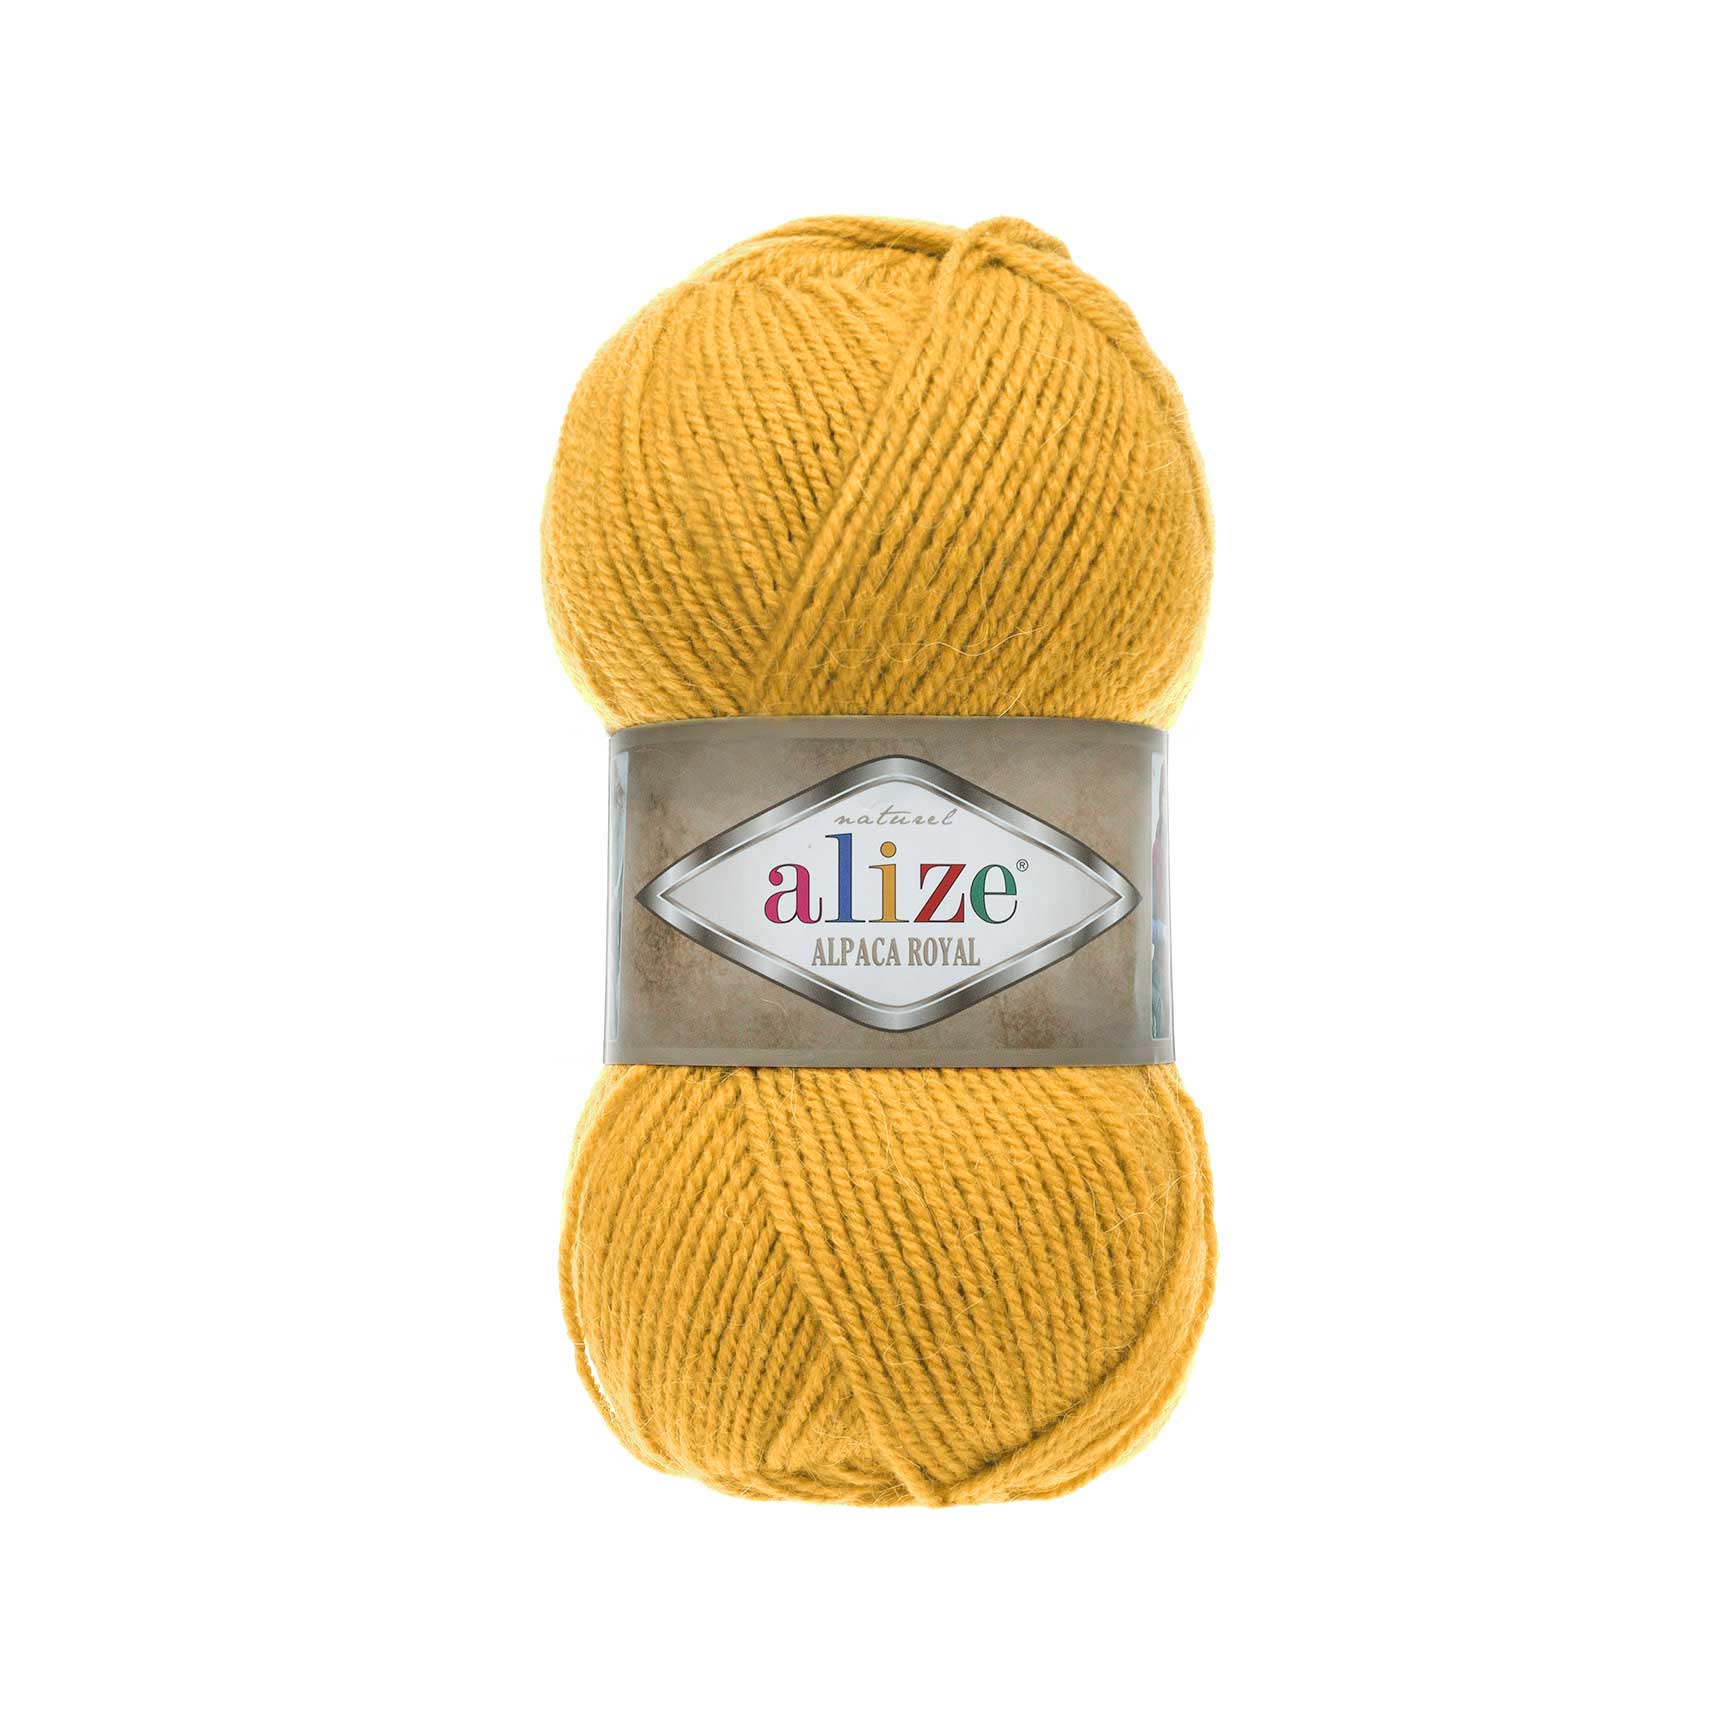 Buy ALIZE ALPACA ROYAL From ALIZE Online